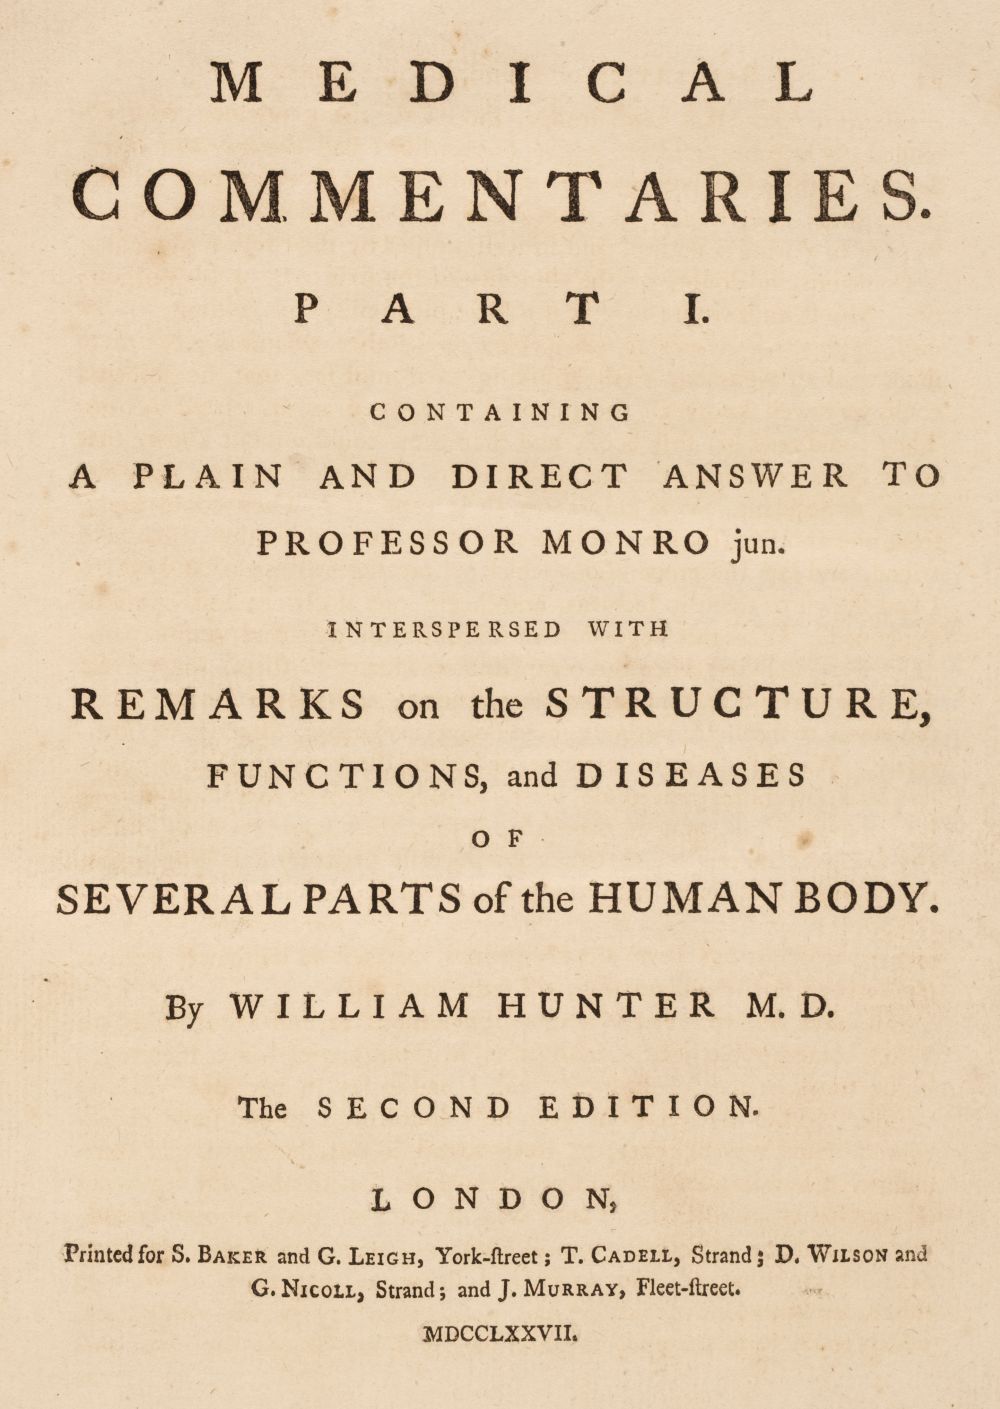 Hunter (William). Medical Commentaries. Part I., 2nd edition, 1777